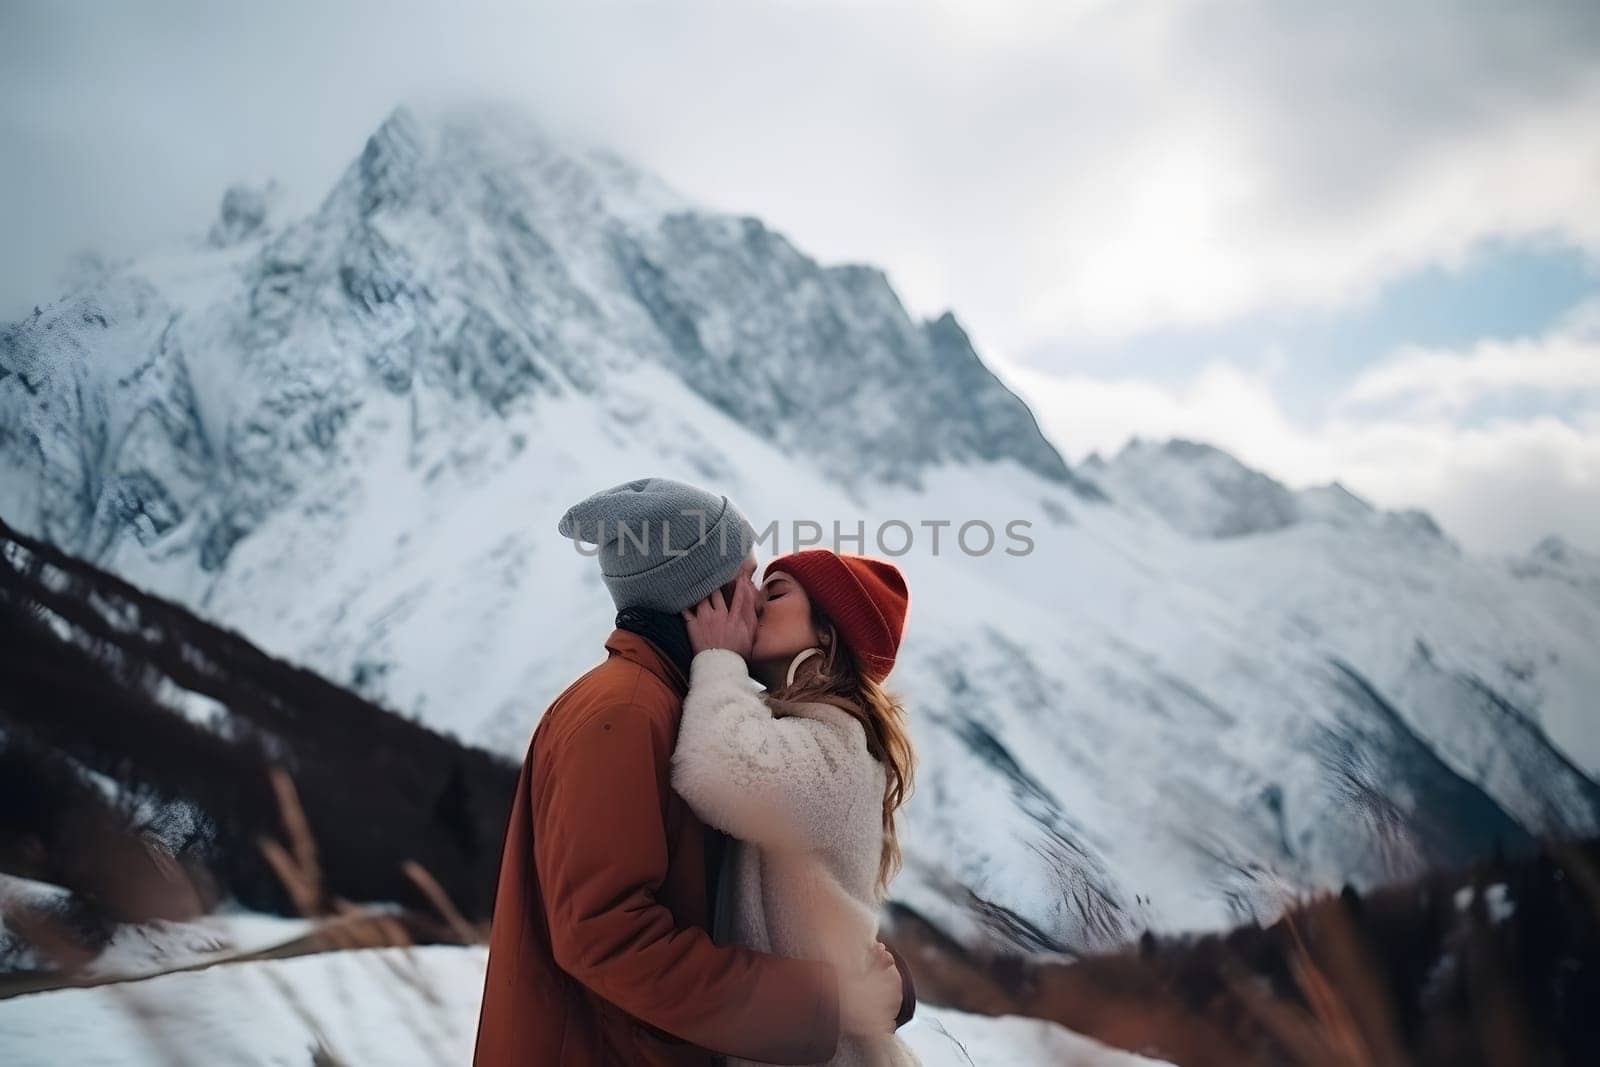 Loving couple kissing in mountains on background of snow covered peak at daylight. Neural network generated in May 2023. Not based on any actual person, scene or pattern.